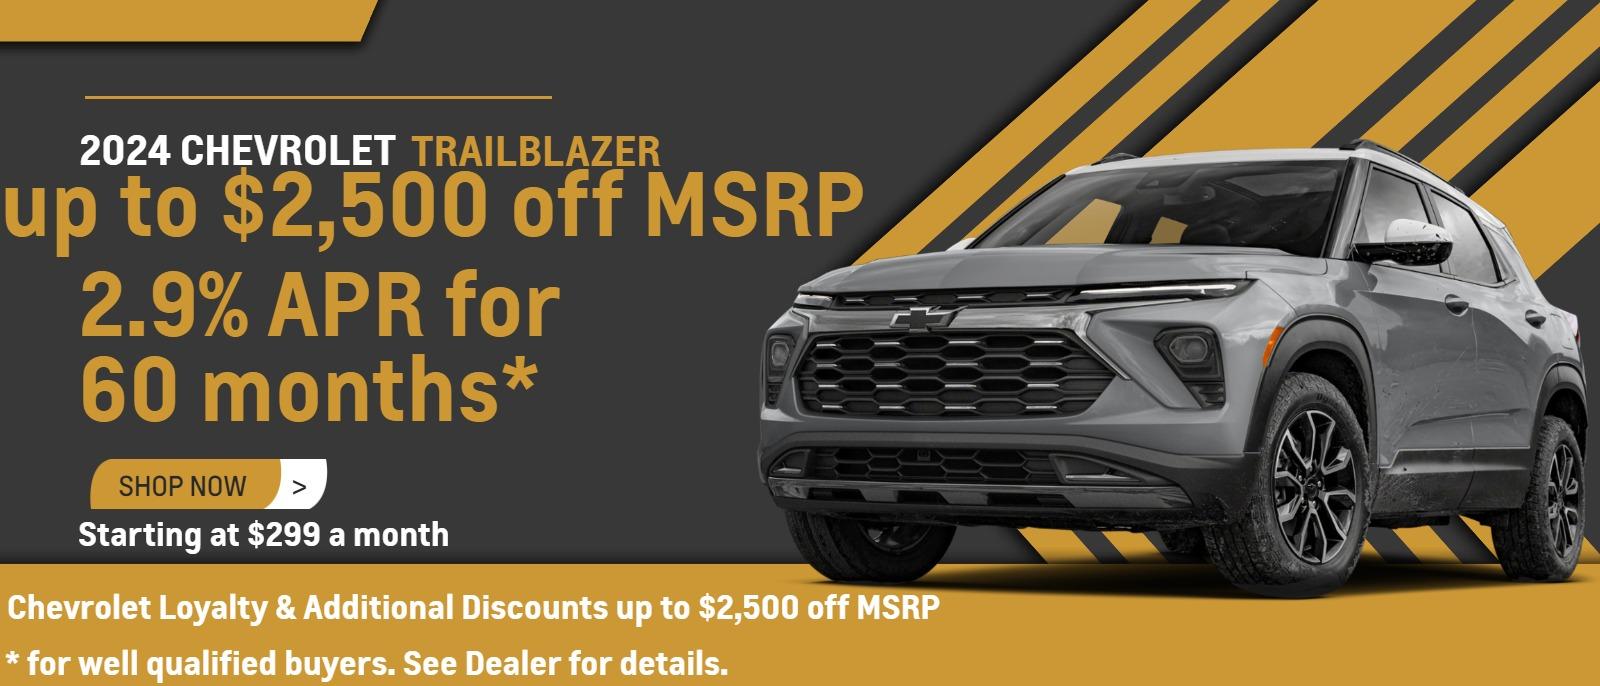 2024 Trailblazer up to $2,500 off MSRP 2.9% APR for 60 months for well qualified buyers